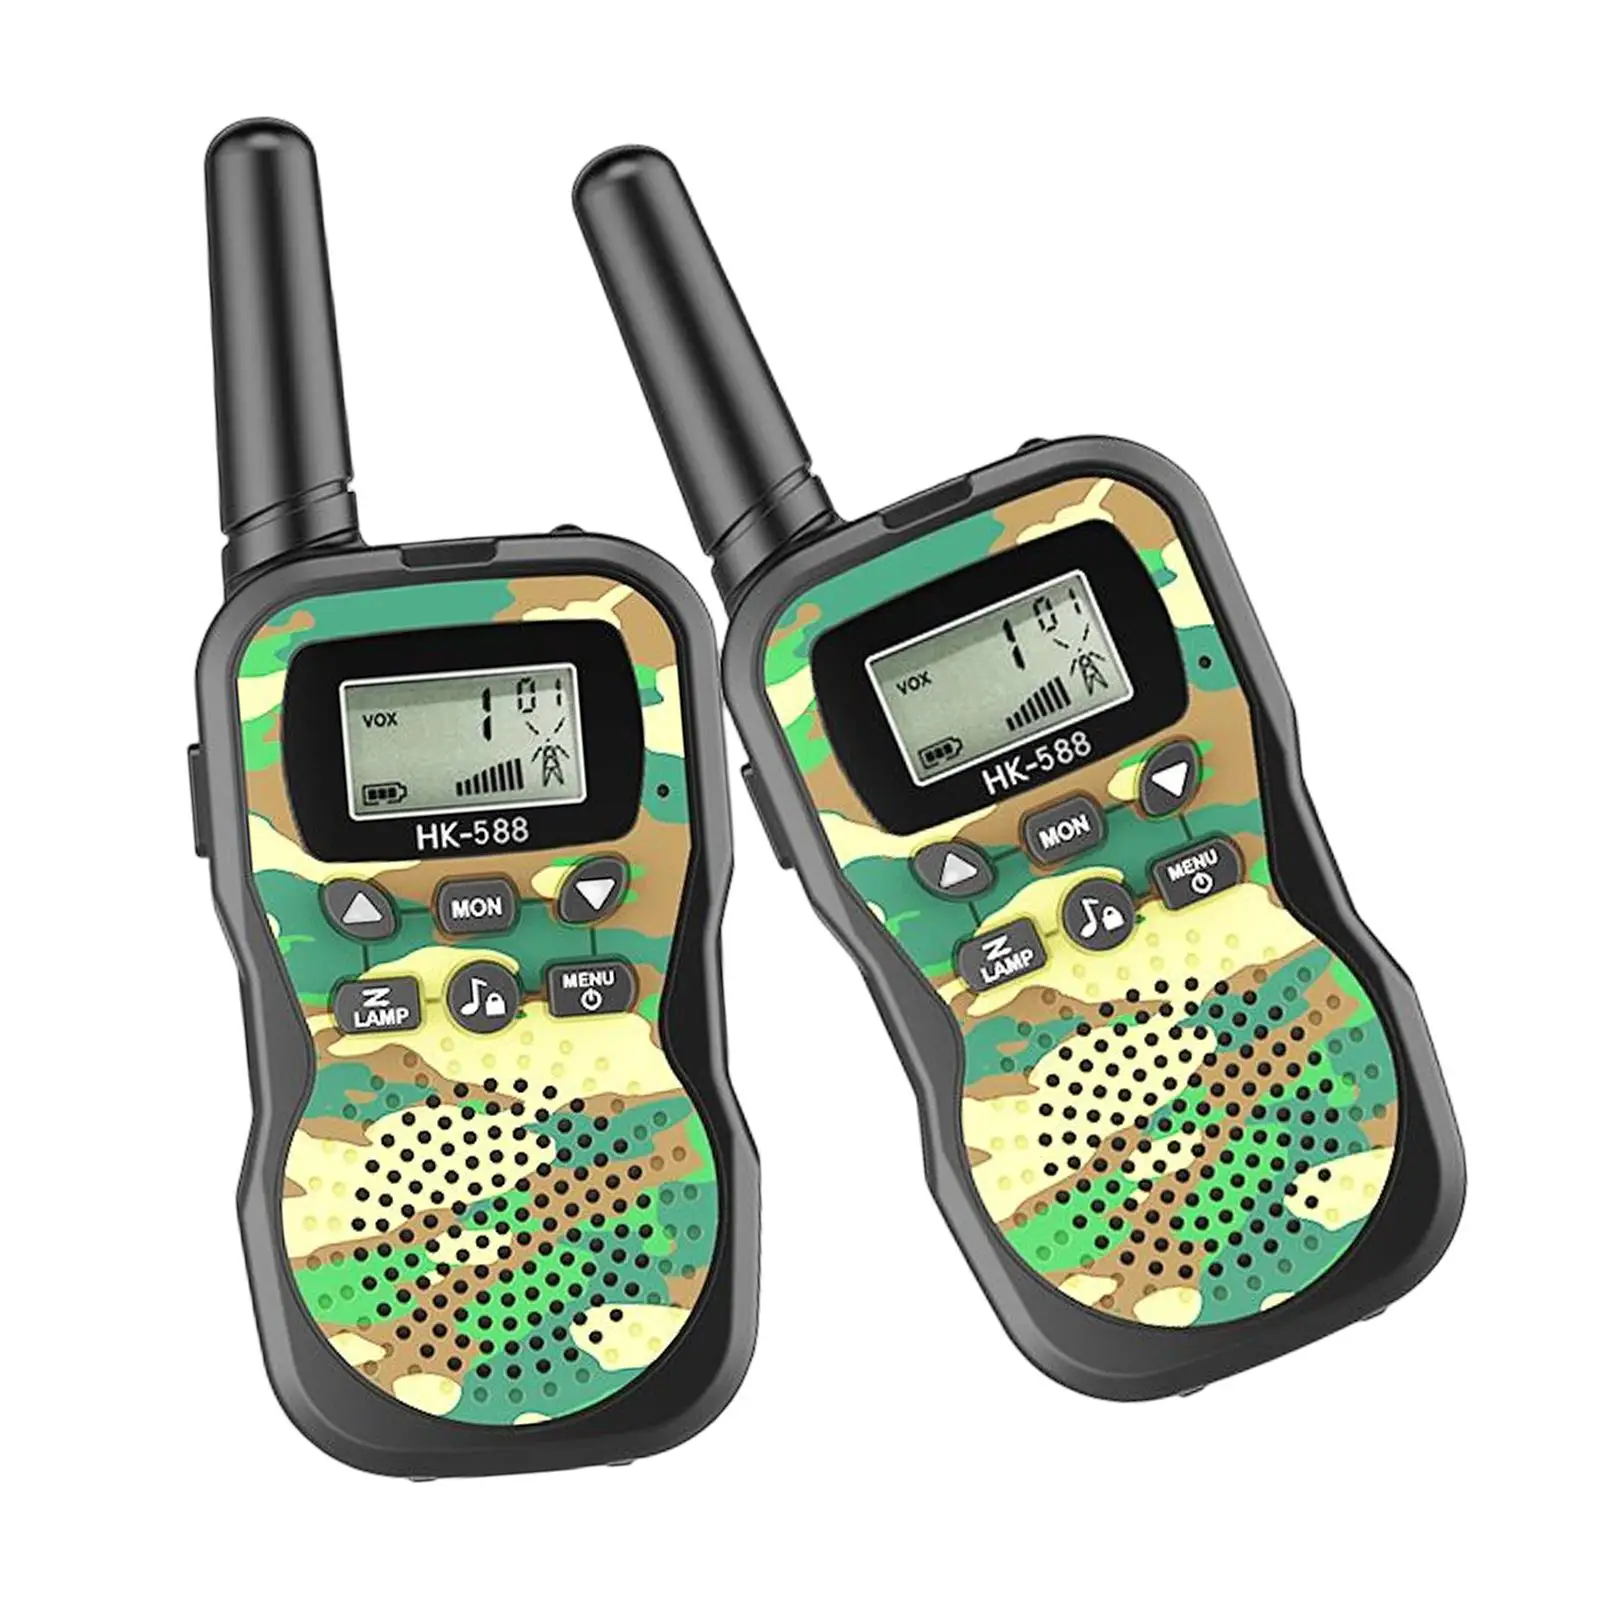 Outdoor Kids Walkie Talkies Toy Two Way Radios for 3-12 Year Old Boys Girls 5.7x3.5inch Interactive Long Range with Backlit LCD